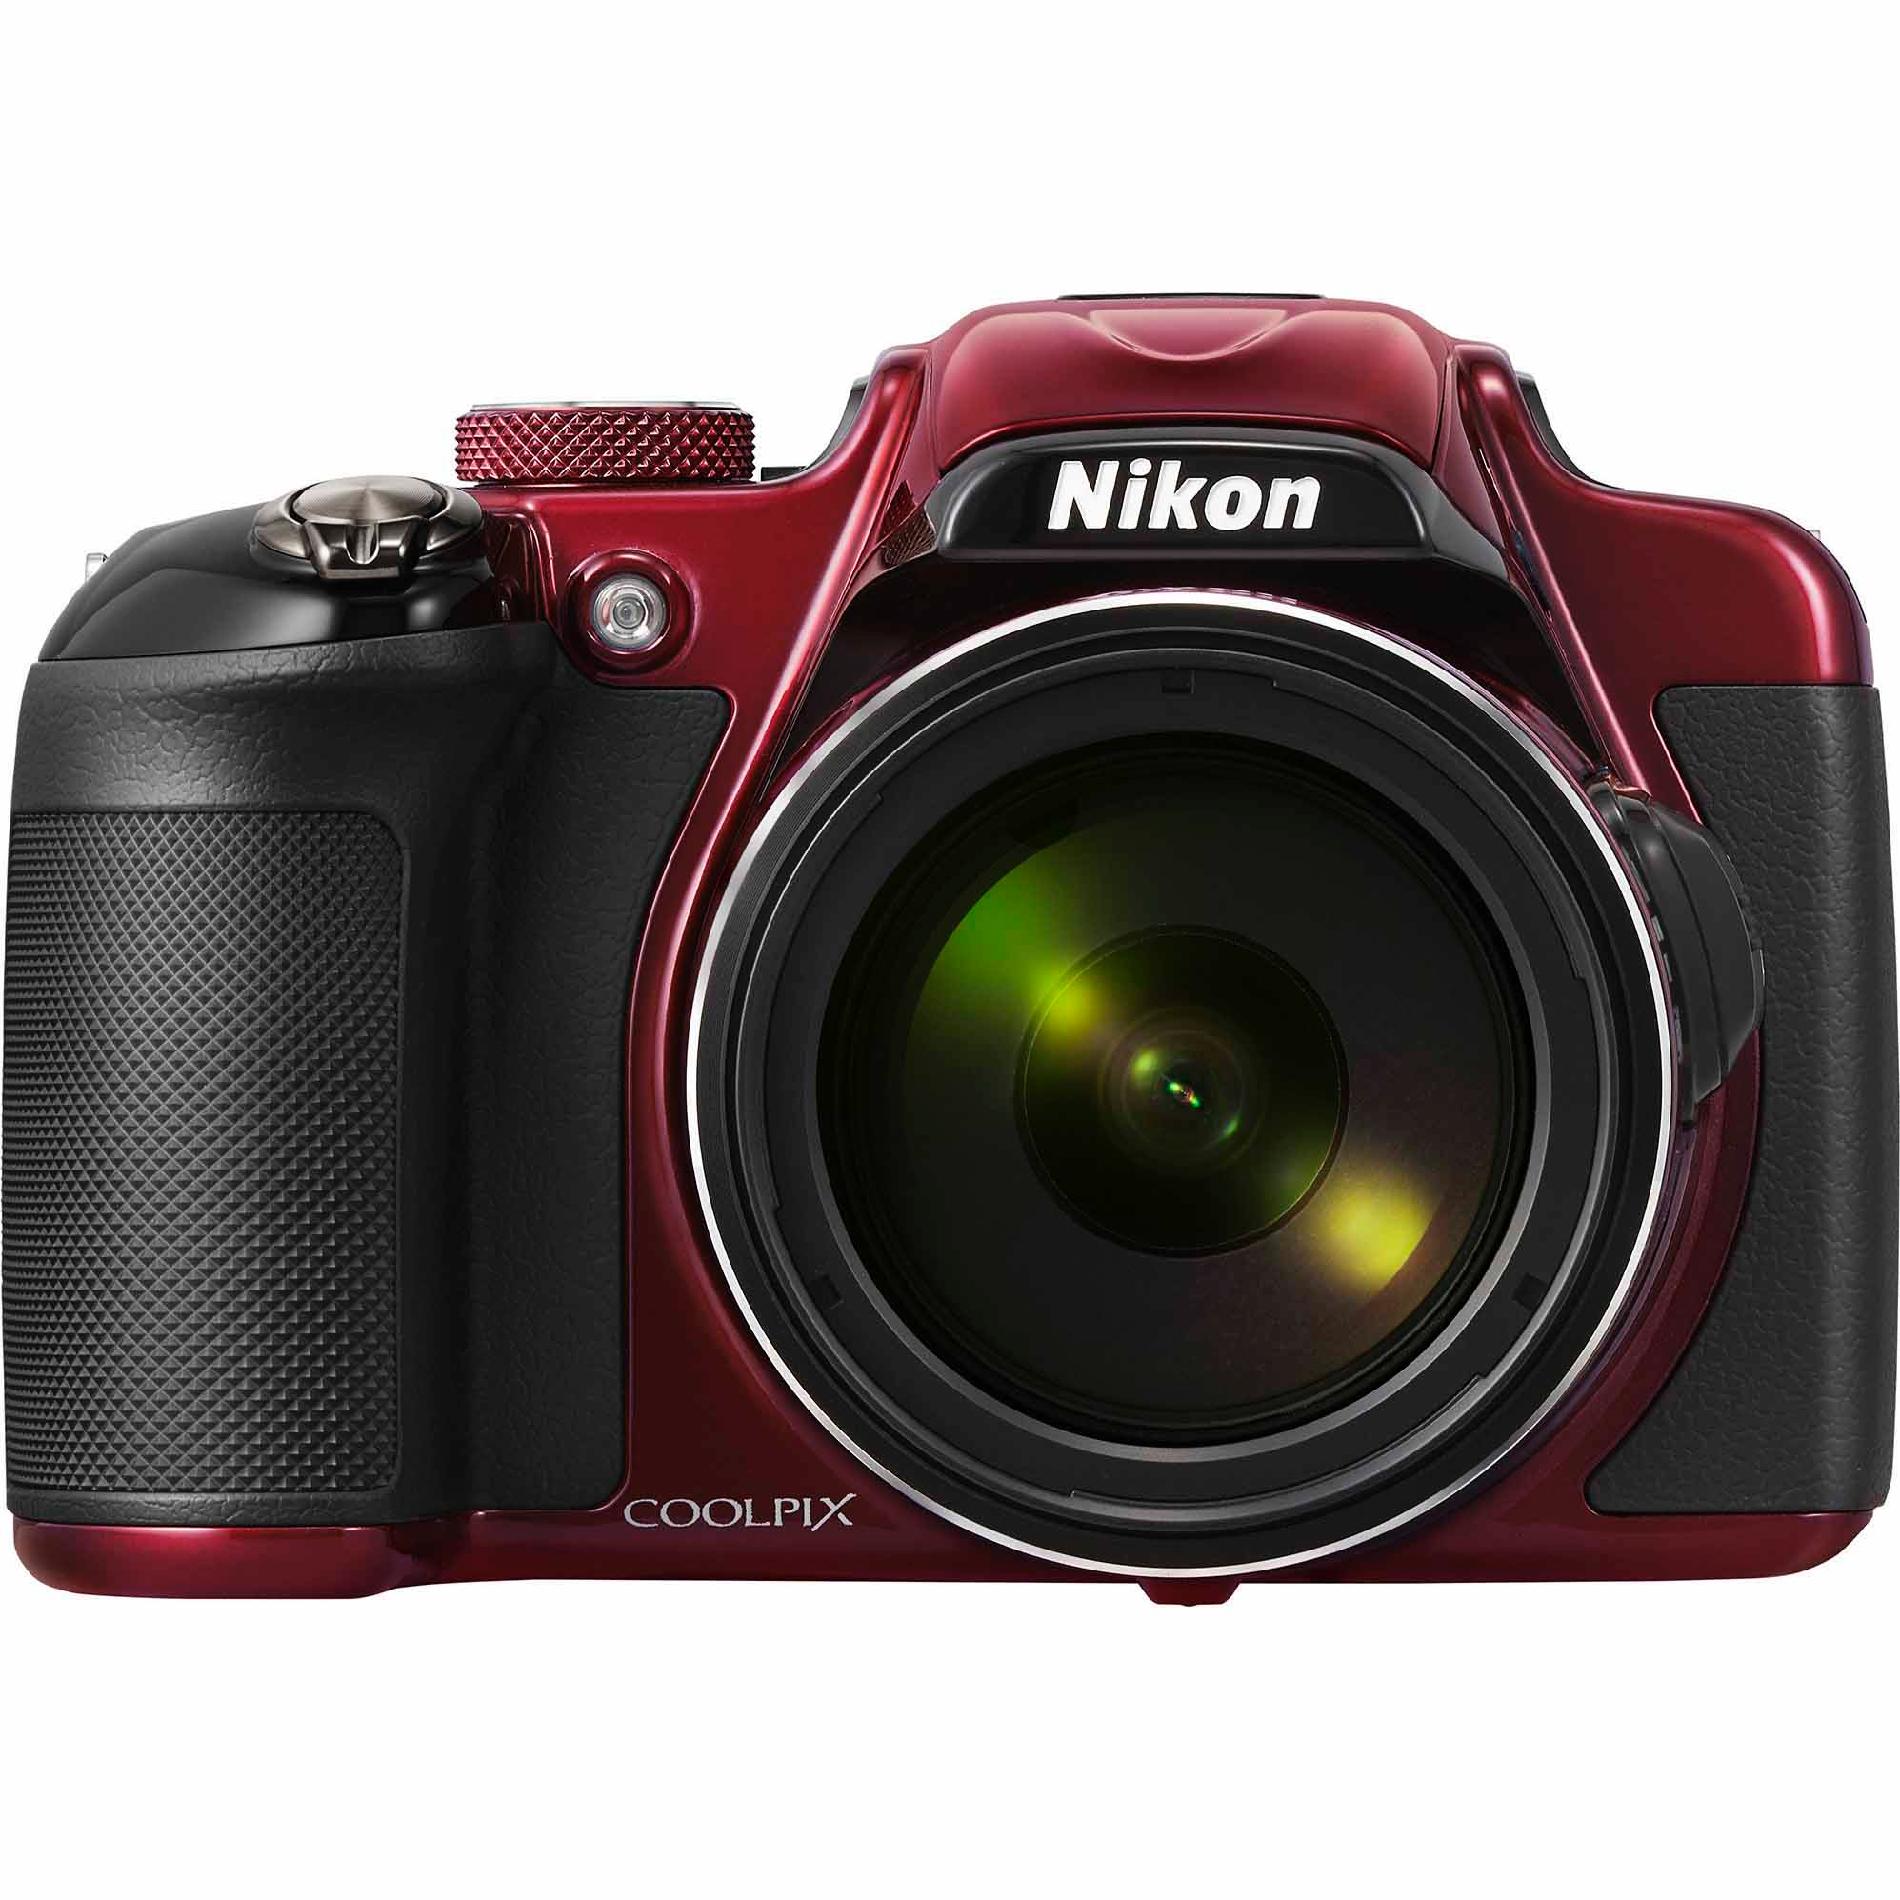 16.1-Megapixel COOLPIX P600 with Built-In WiFi Digital Camera - Red